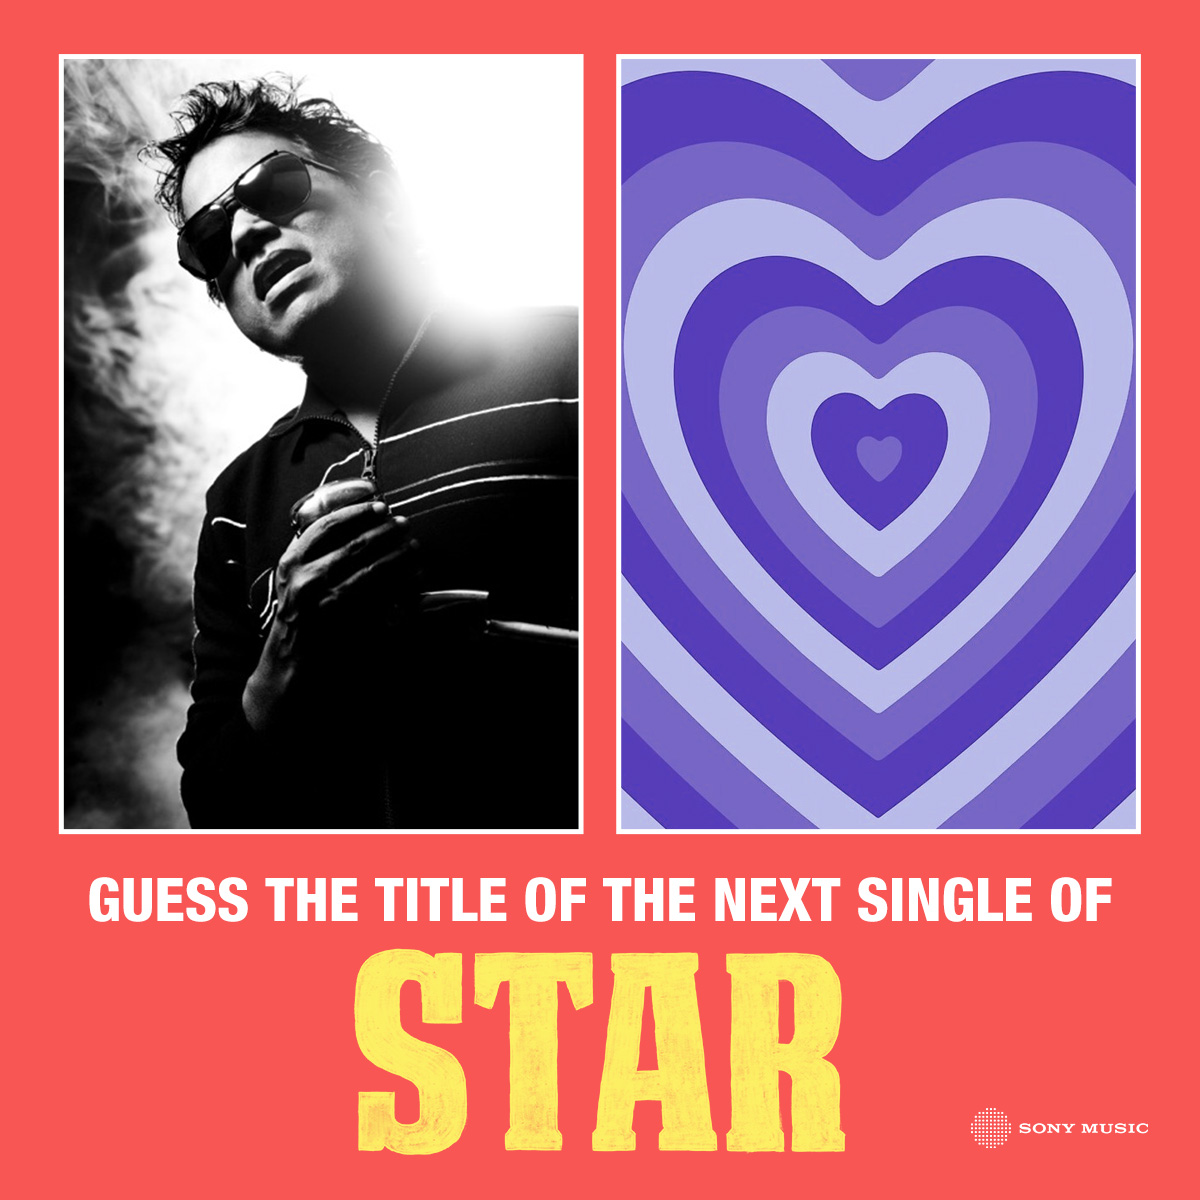 Can you guess the title of the next single from #Star? Look closely at the picture for a clue. UPDATE TOMORROW 📢 #STARMOVIE ⭐ #KAVIN #ELAN #YUVAN #KEY @Kavin_m_0431 @elann_t @thisisysr @aaditiofficial @PreityMukundan @LalDirector @riseeastcre @SVCCofficial @Pentelasagar